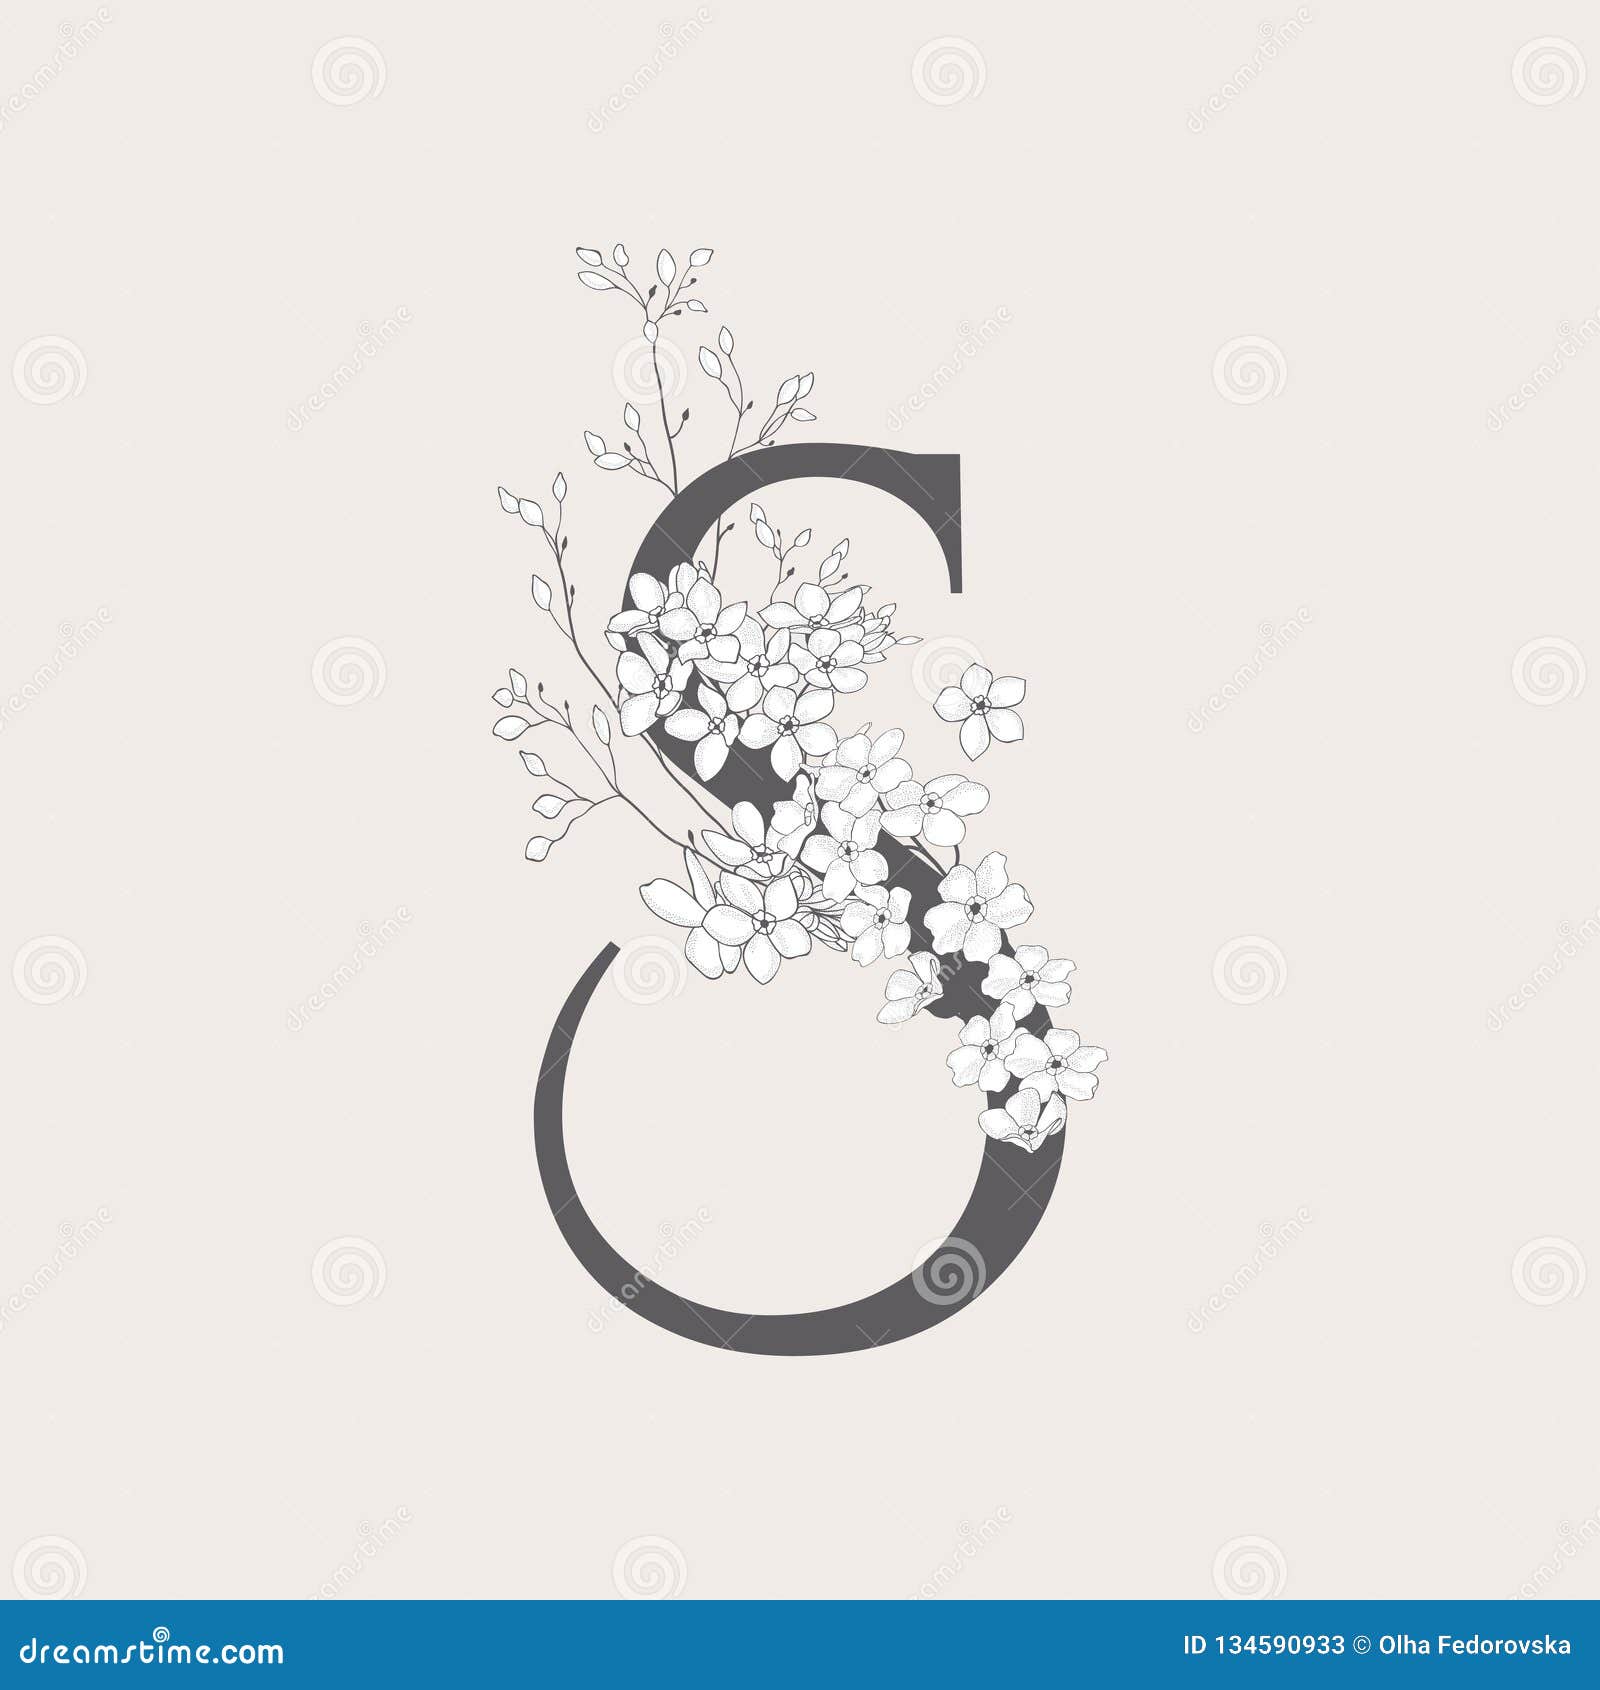 VL Initial Letter Gold calligraphic feminine floral hand drawn